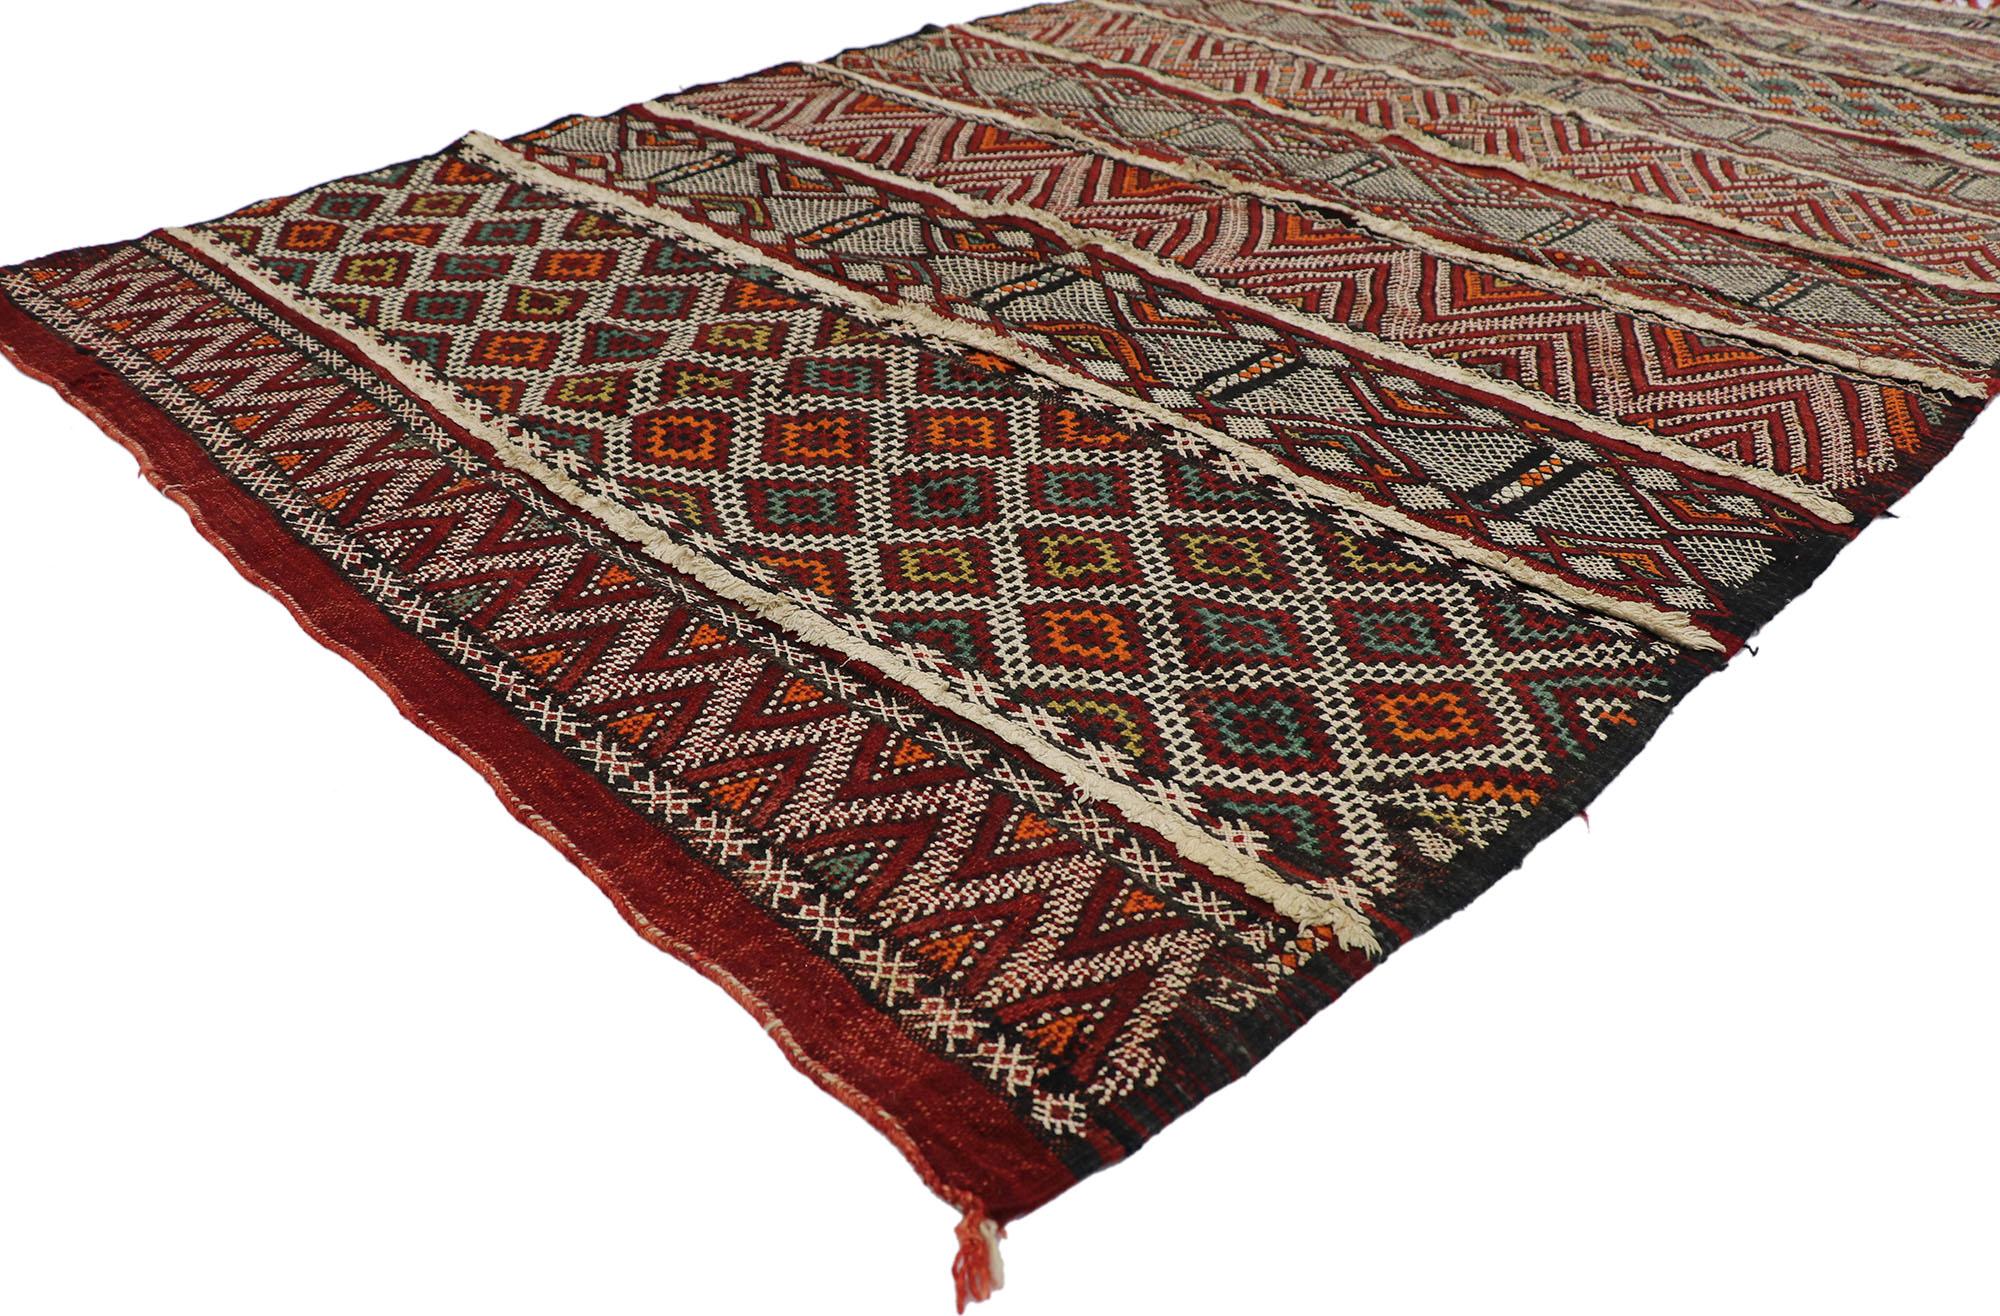 21471 Vintage Zemmour Moroccan Kilim Rug with Tribal Style 04'11 x 08'04. Full of tiny details and a bold expressive design combined with tribal style, this hand-woven wool vintage Zemmour Berber Moroccan kilim rug is a captivating vision of woven